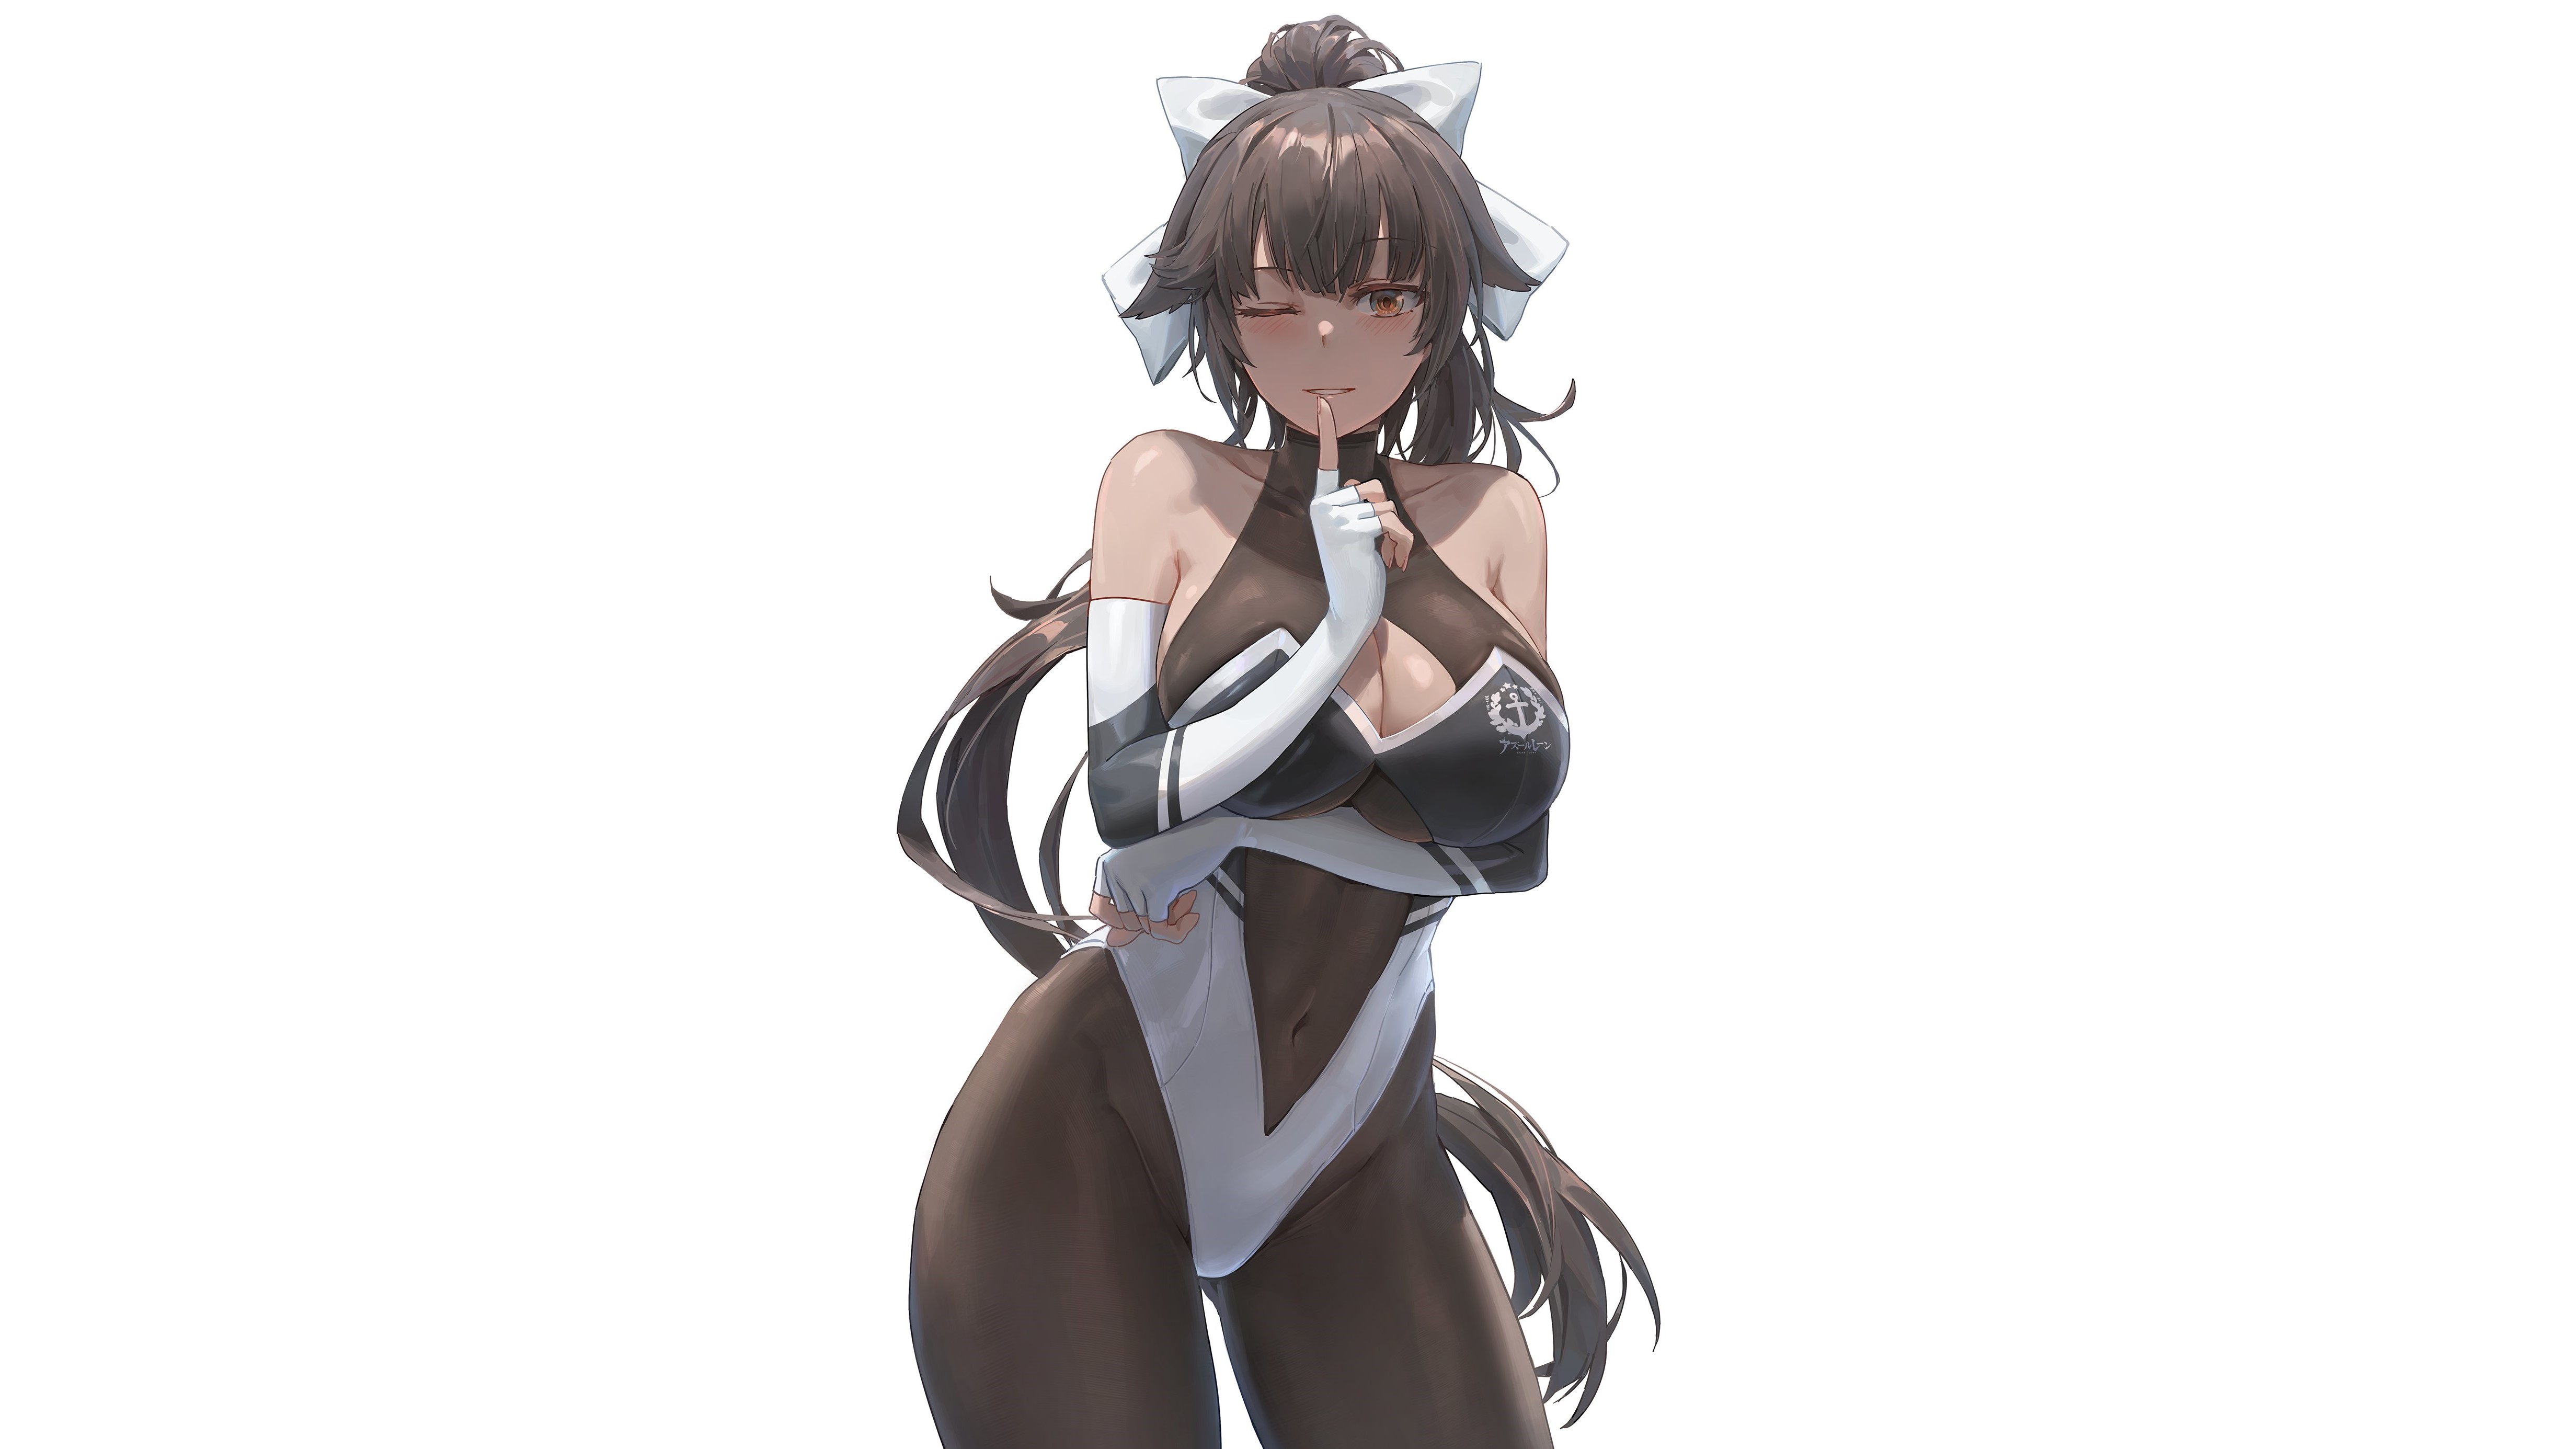 Anime 4927x2771 Azur Lane Takao (Azur Lane) anime anime girls simple background looking at viewer long hair wink leotard bodysuit cleavage boobs thighs Yohan1754 brunette ponytail Race Queen Outfit